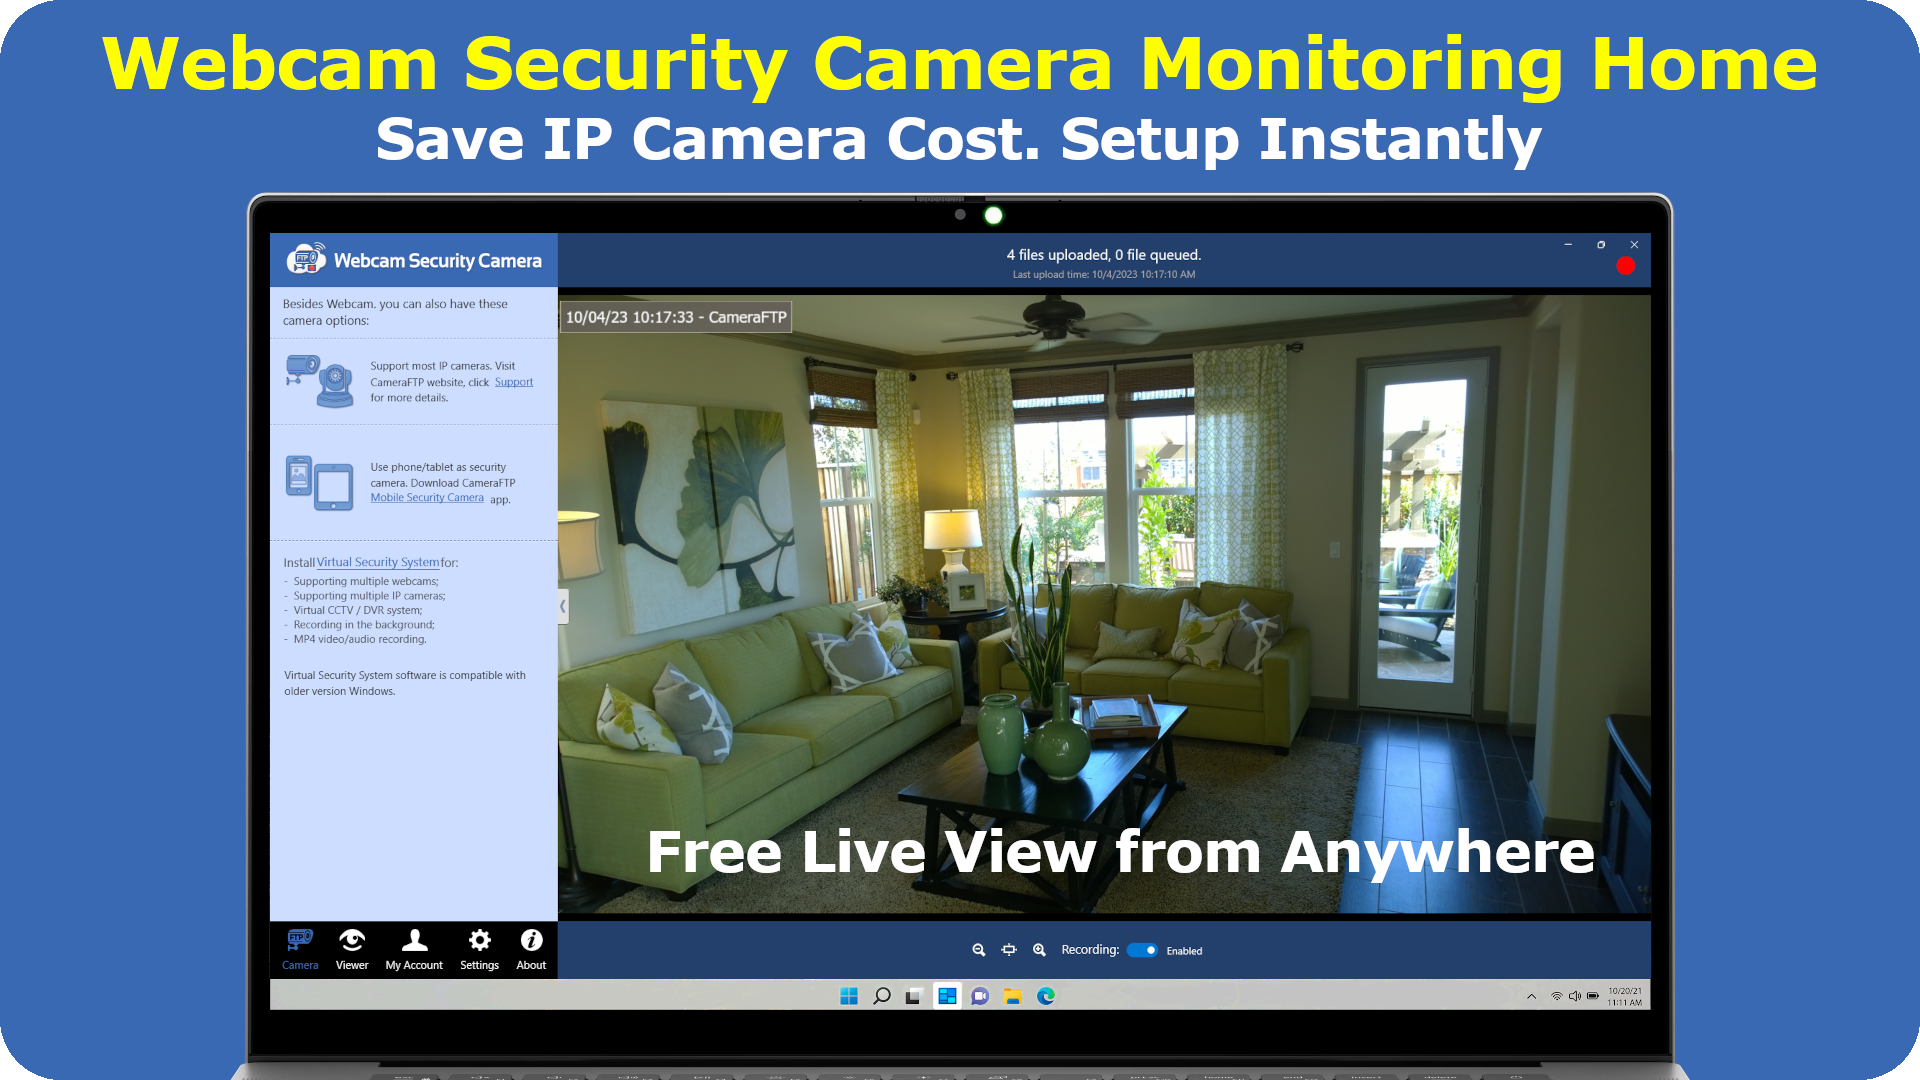 Use Webcam Security Camera to monitor a home. Save IP camera cost and setup instantly. Free live view from anywhere.